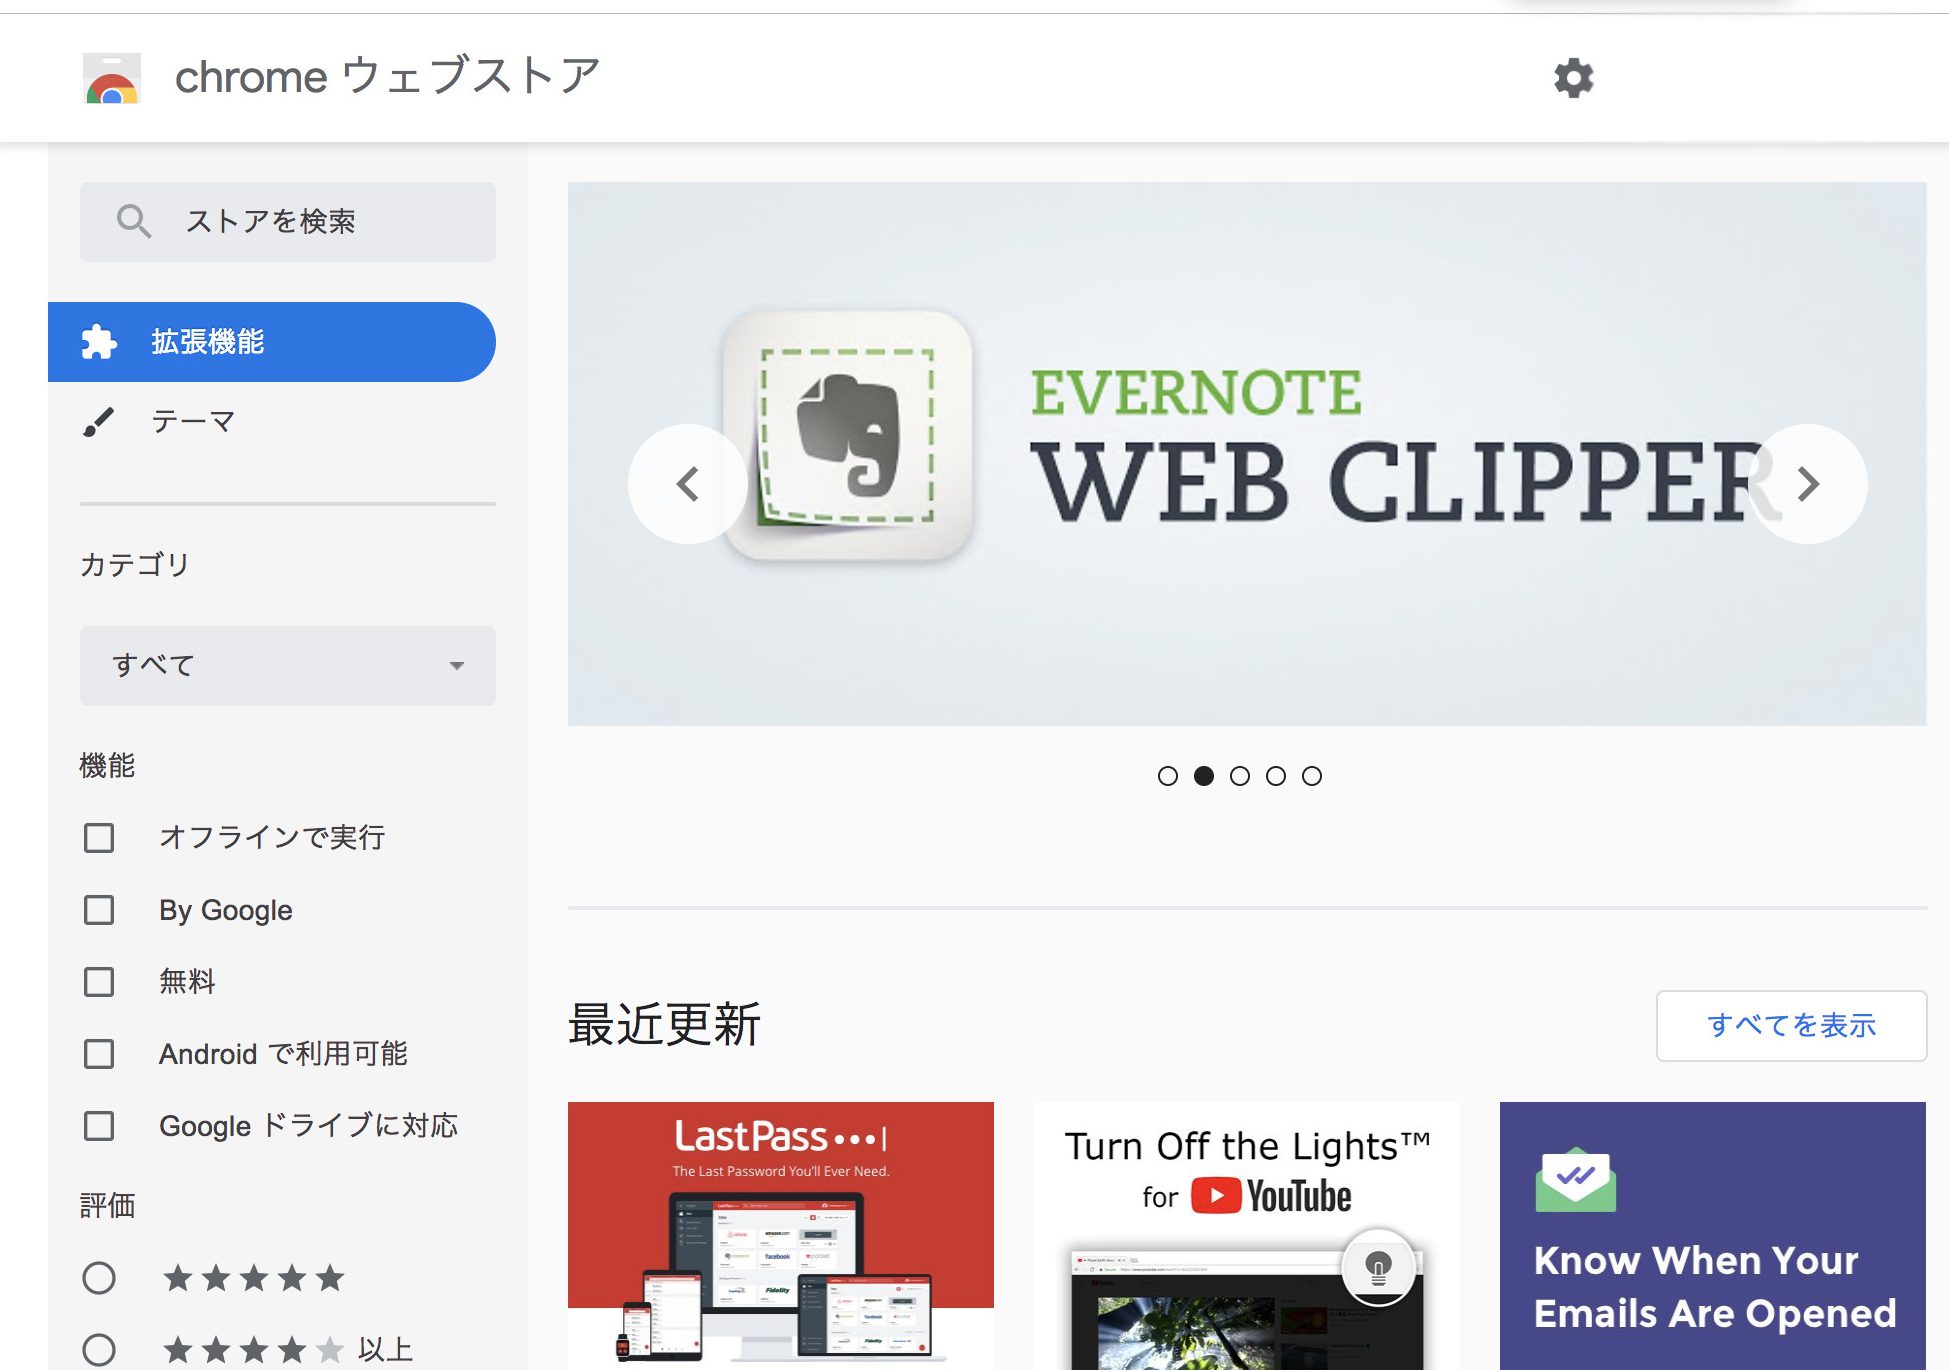 chrome google webstore category extensions